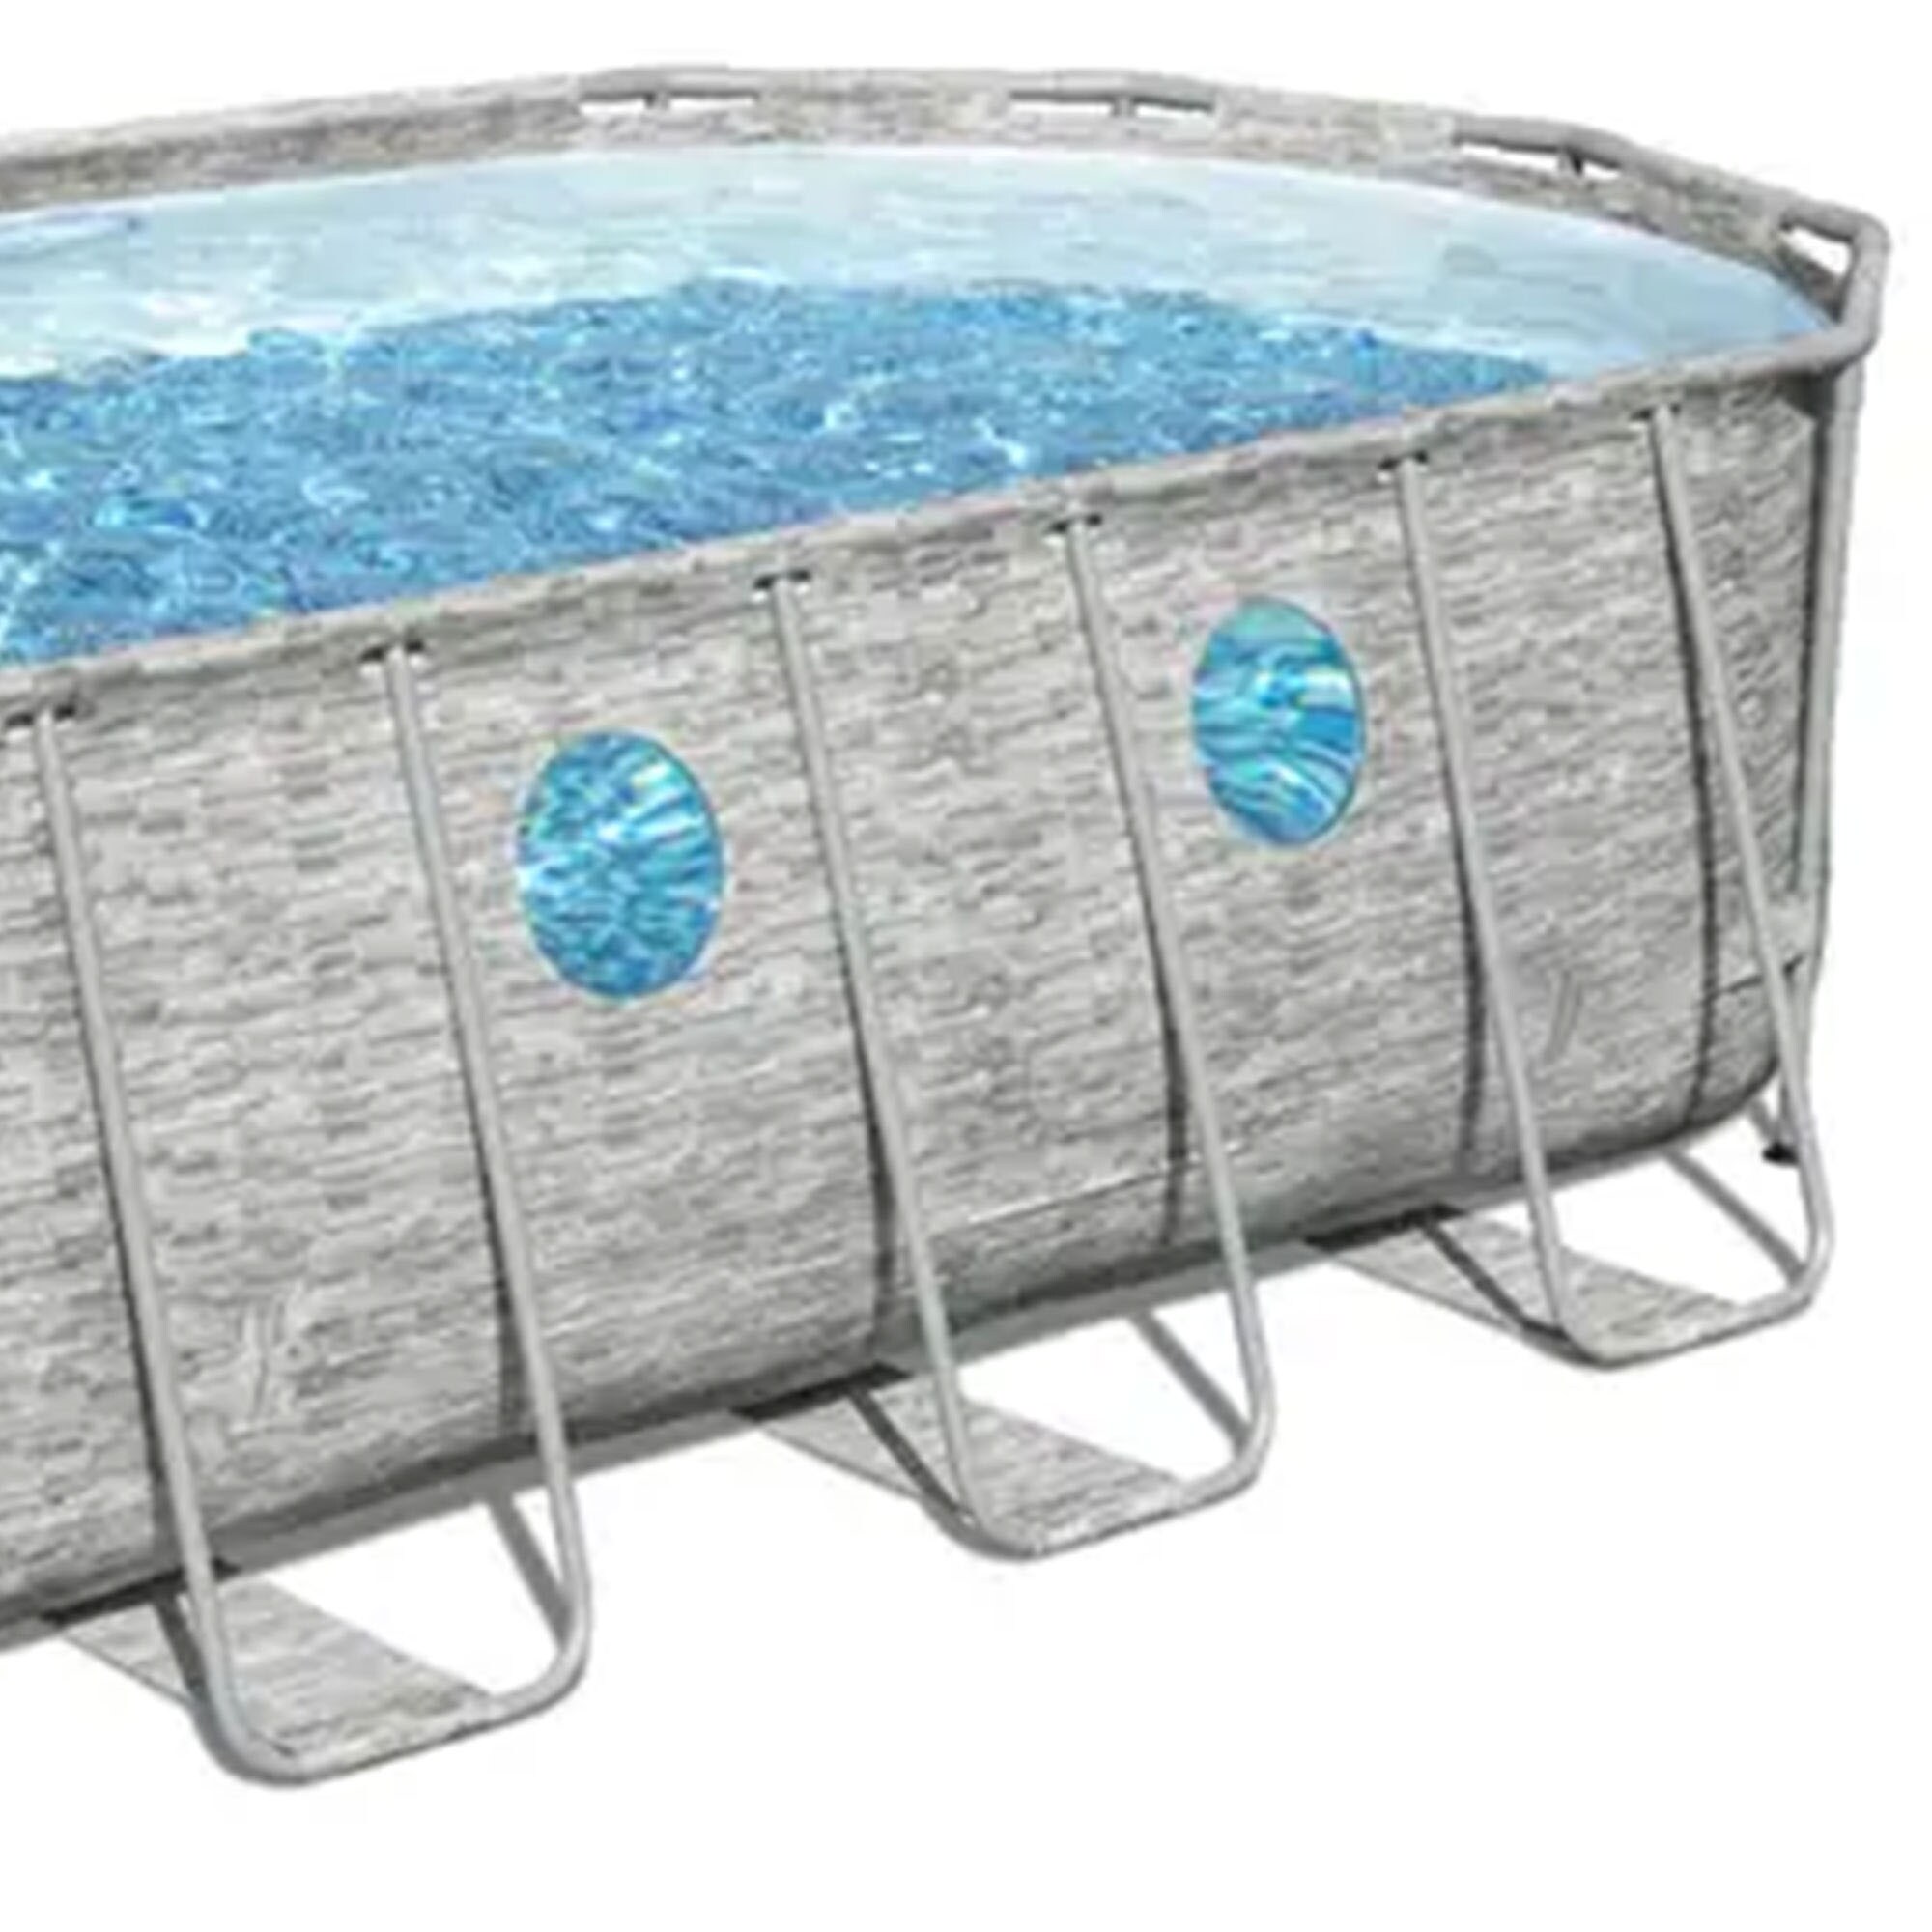 Above-Ground 9-ft Cover Pump,Pool x Steel Ladder at 18-ft Above-Ground with Bestway x Oval Pool Pools and Steel the Vista Swim in Panels Power Filter 48-in Wall department